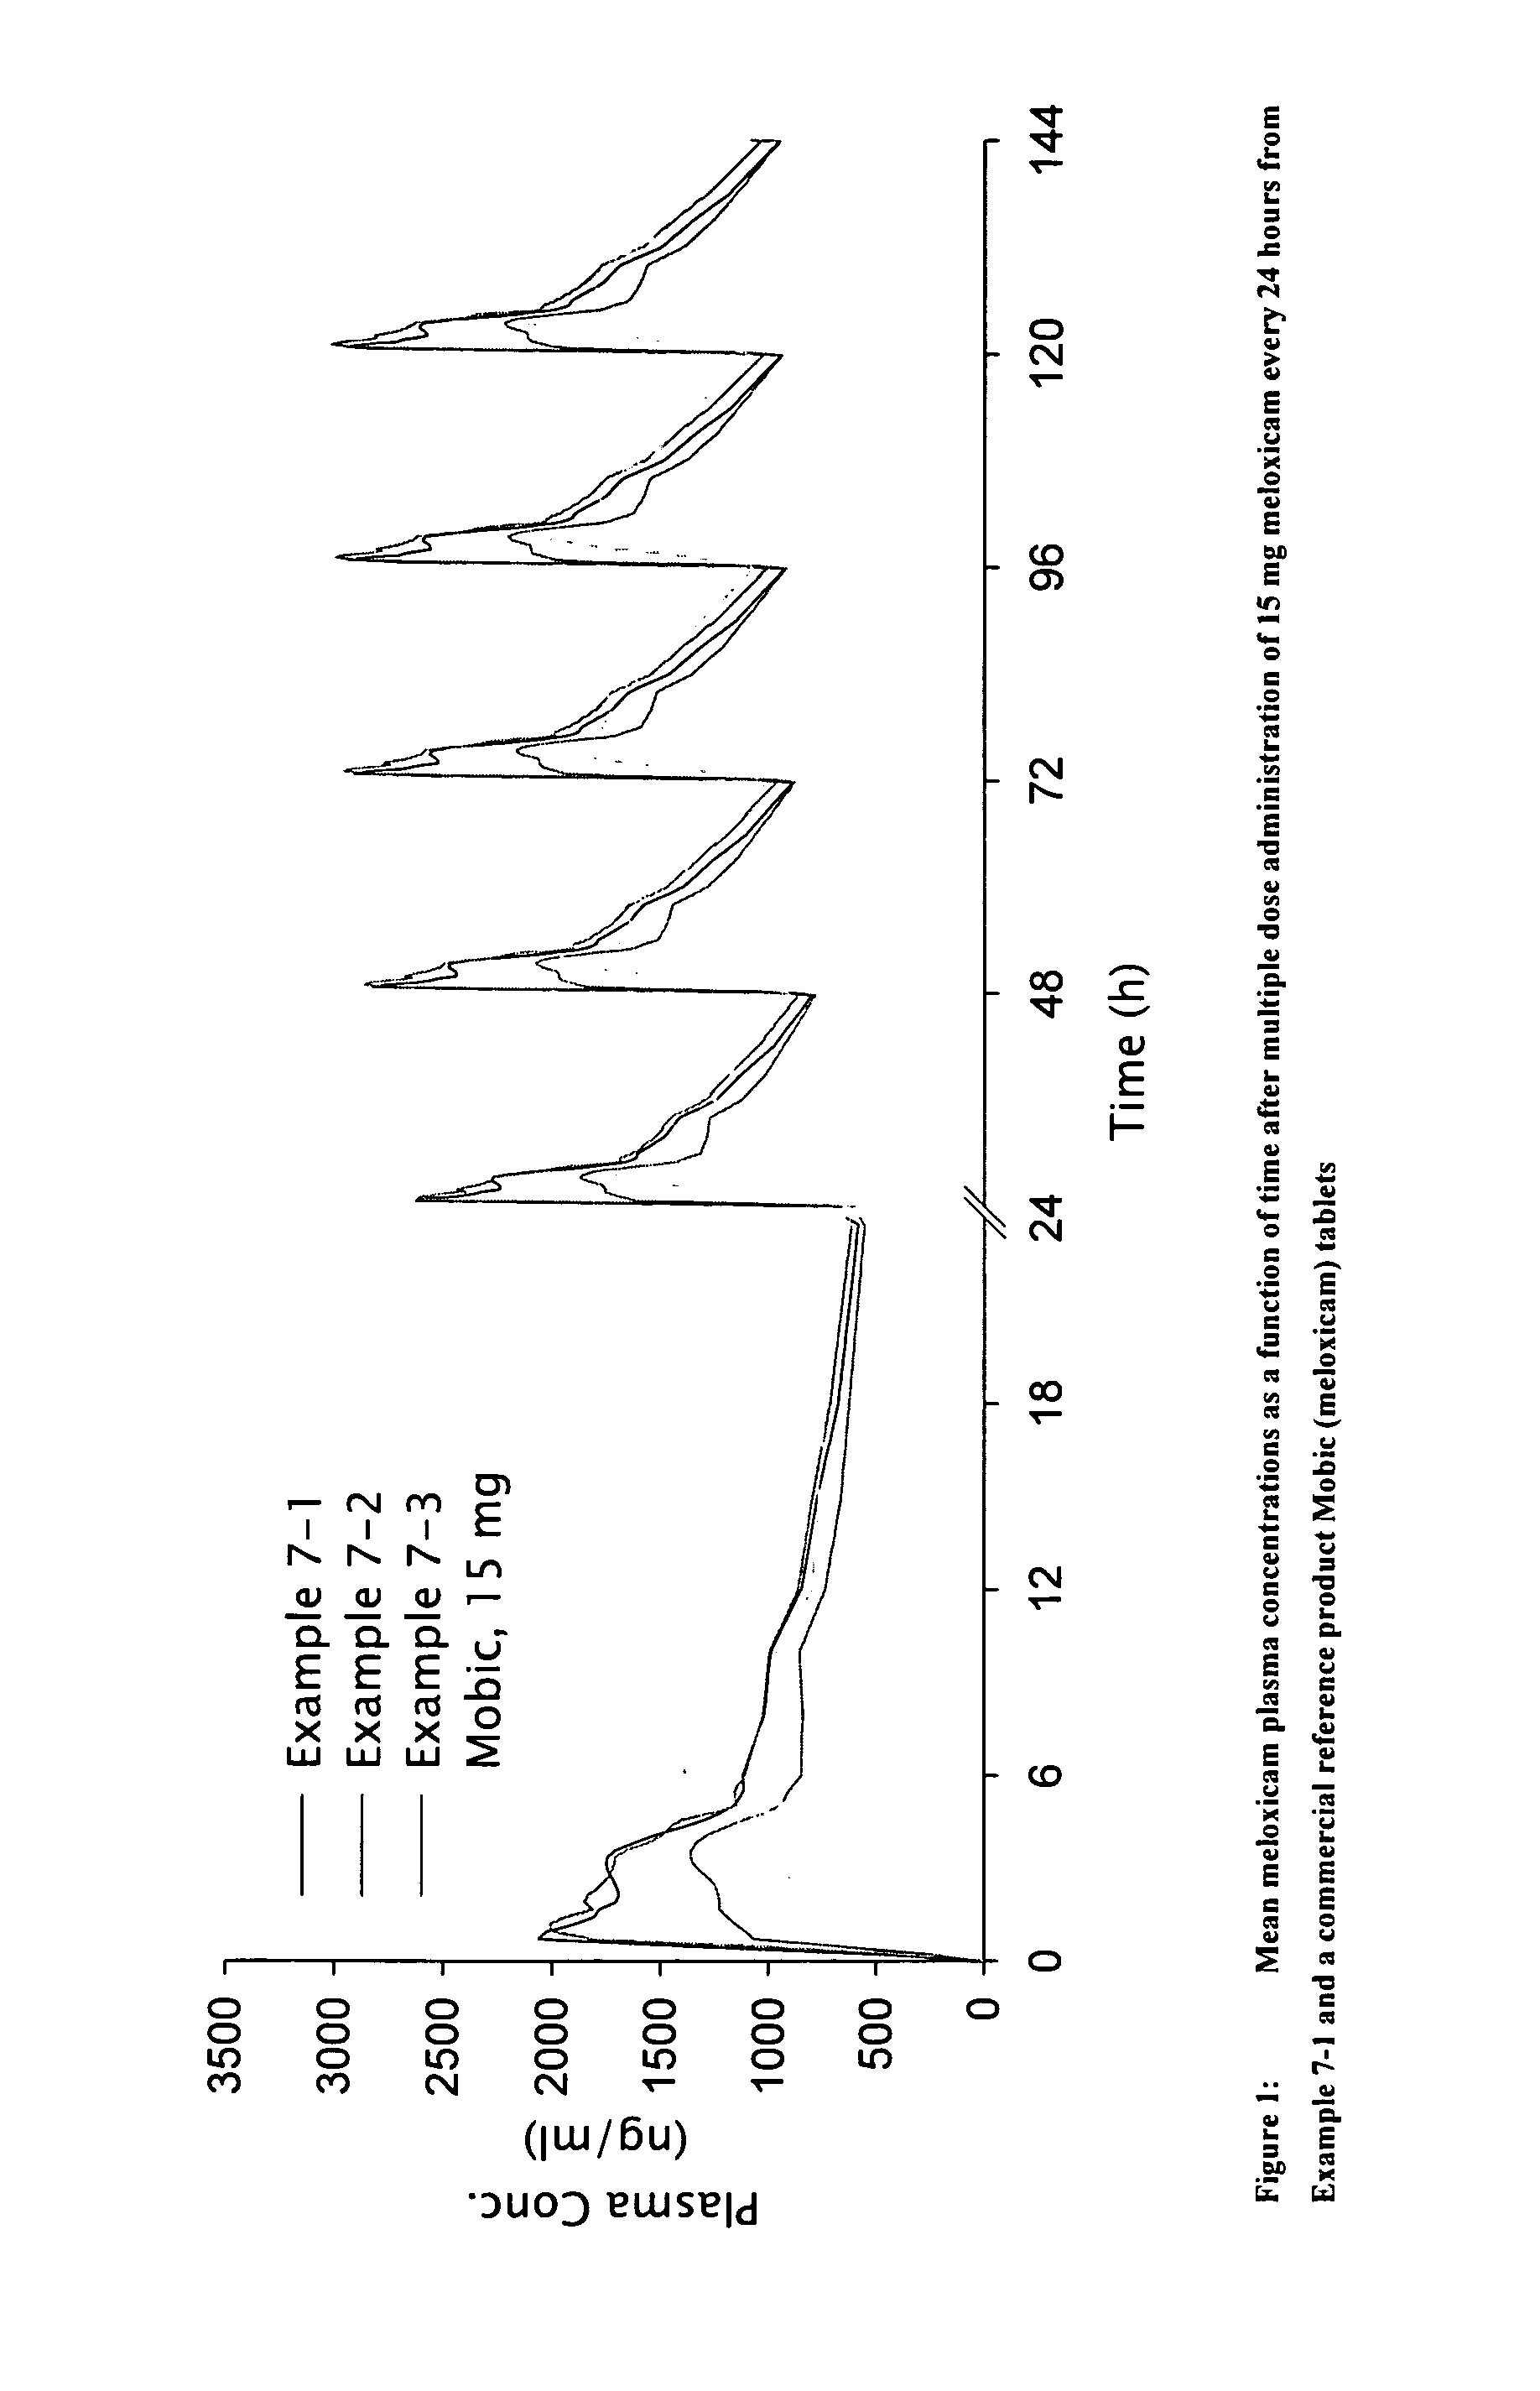 Anti-inflammatory and analgesic compositions and related methods